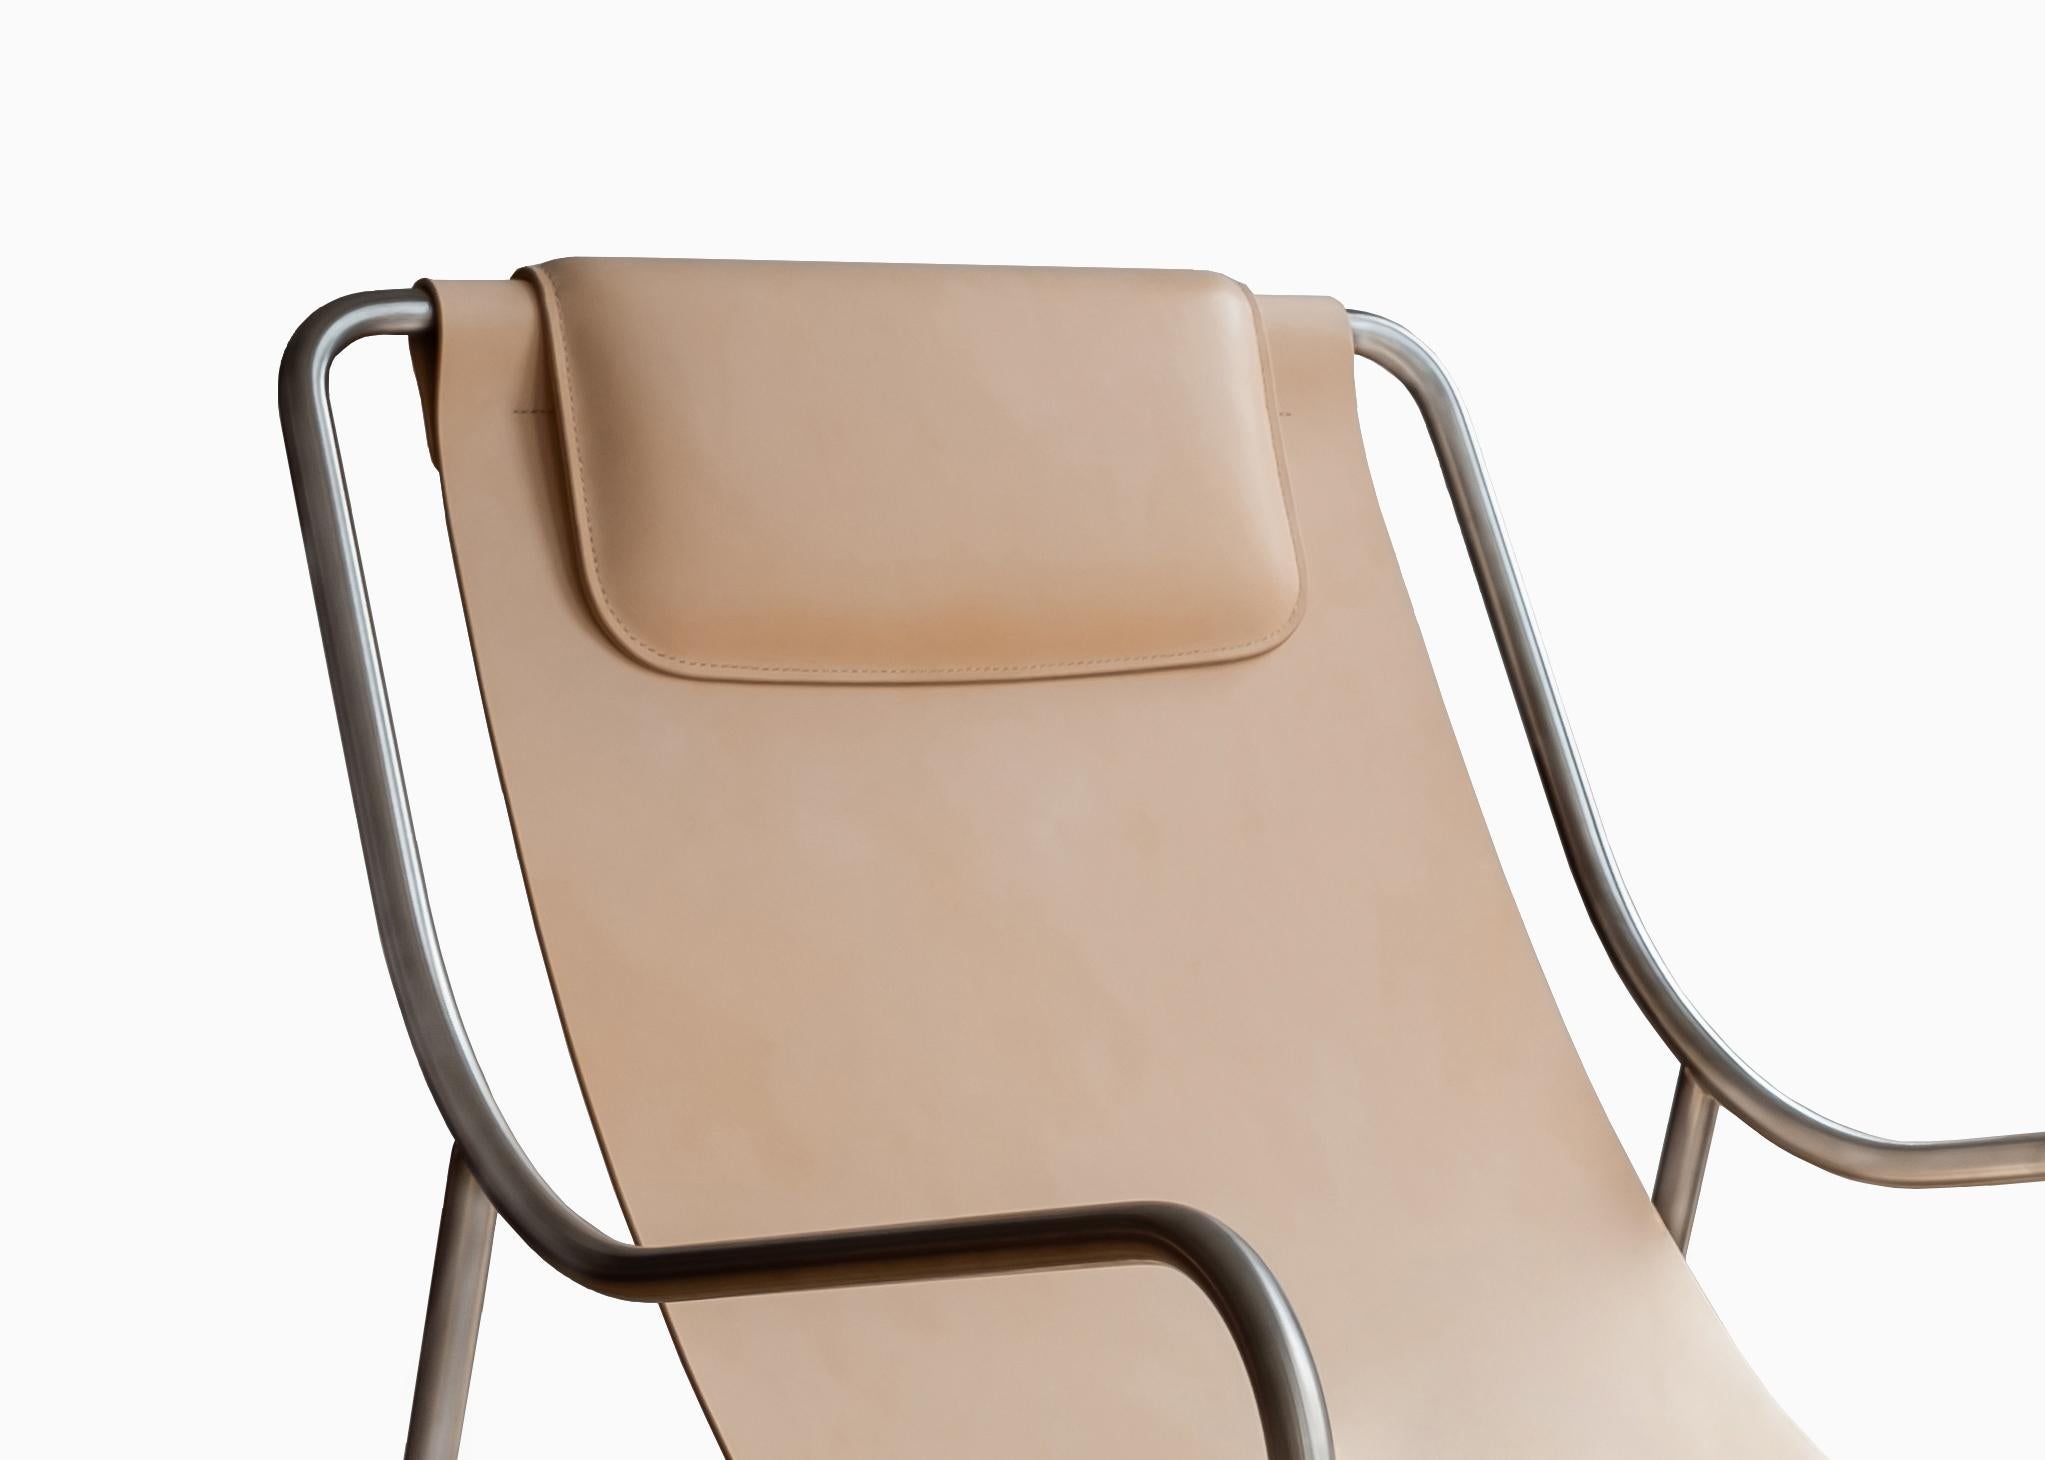 Embracing the purpose to take a break, LISBOA chair invites you to just sit and relax. Combining many observations from different cultures of how people use chairs and which role they play in their every-day life, Keiji Takeuchi designed the LISBOA